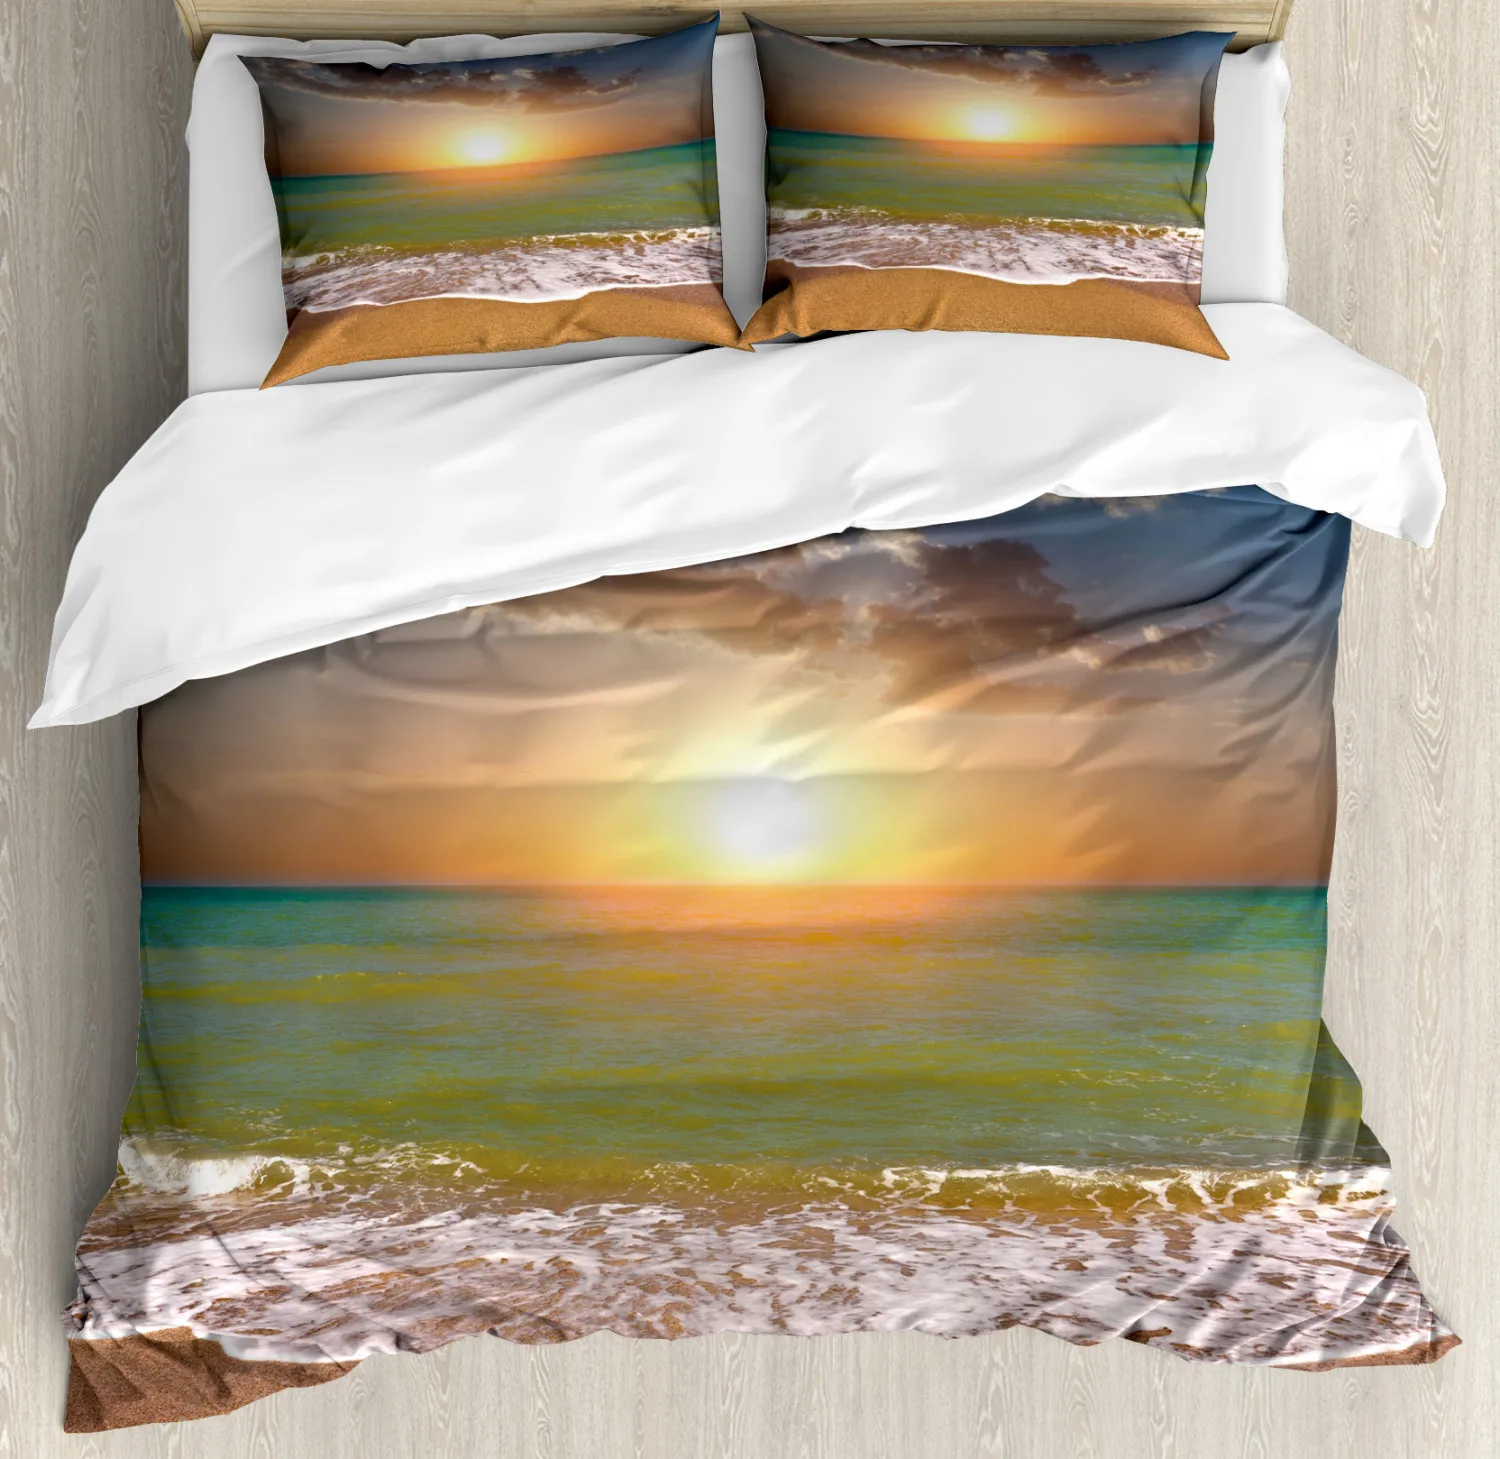 

Sunset Duvet Cover Set King/Queen Size,Over The Sea Tropical Beach Summer Idyllic Scenery Soft Polyester Bedding Set Purple